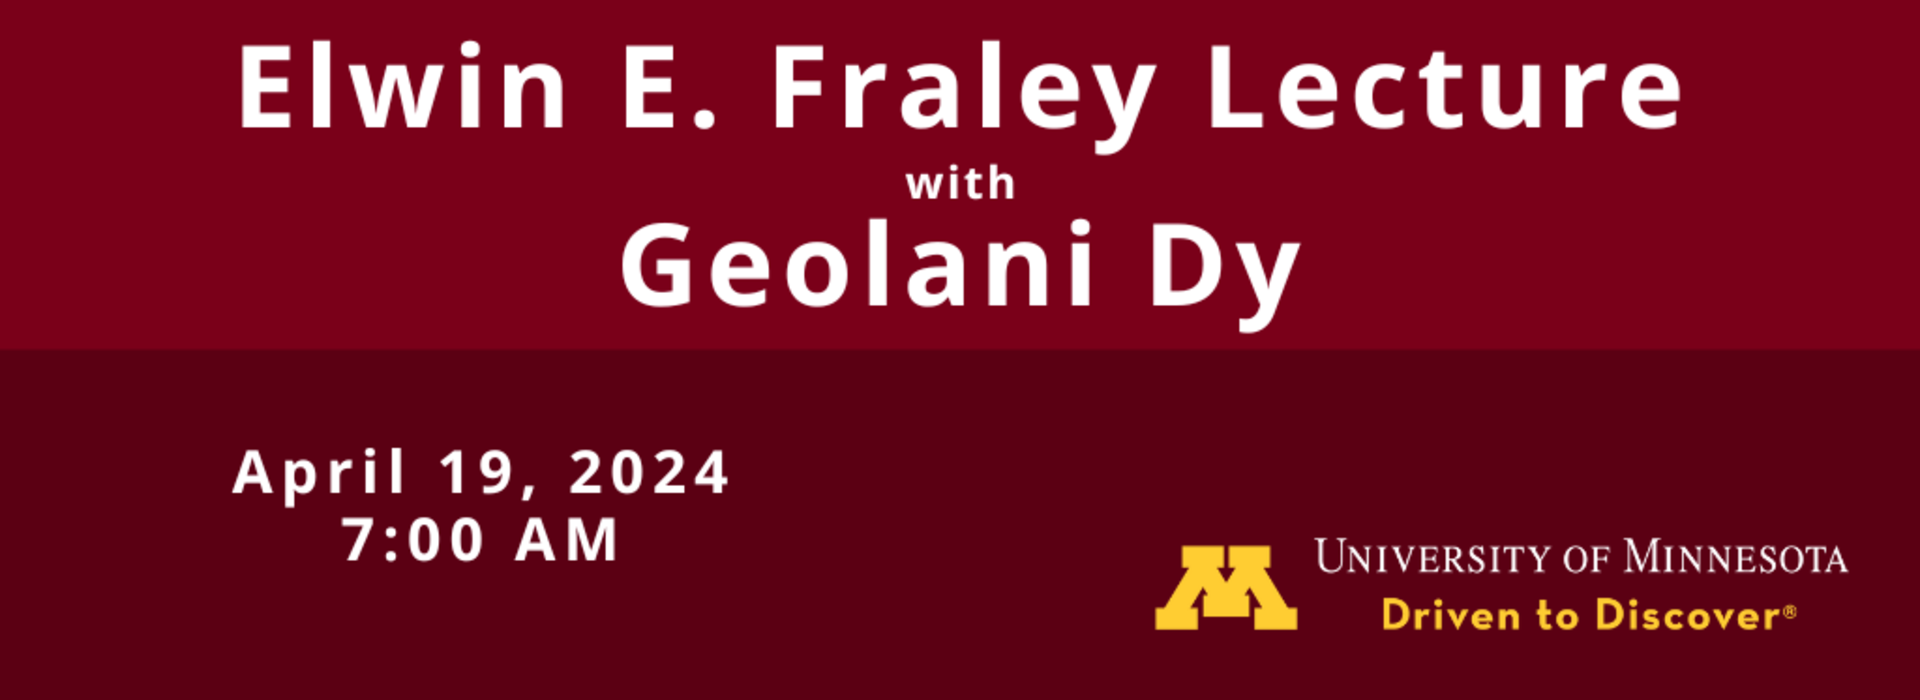 Elwin E. Fraley Lecture with Geolani Dy